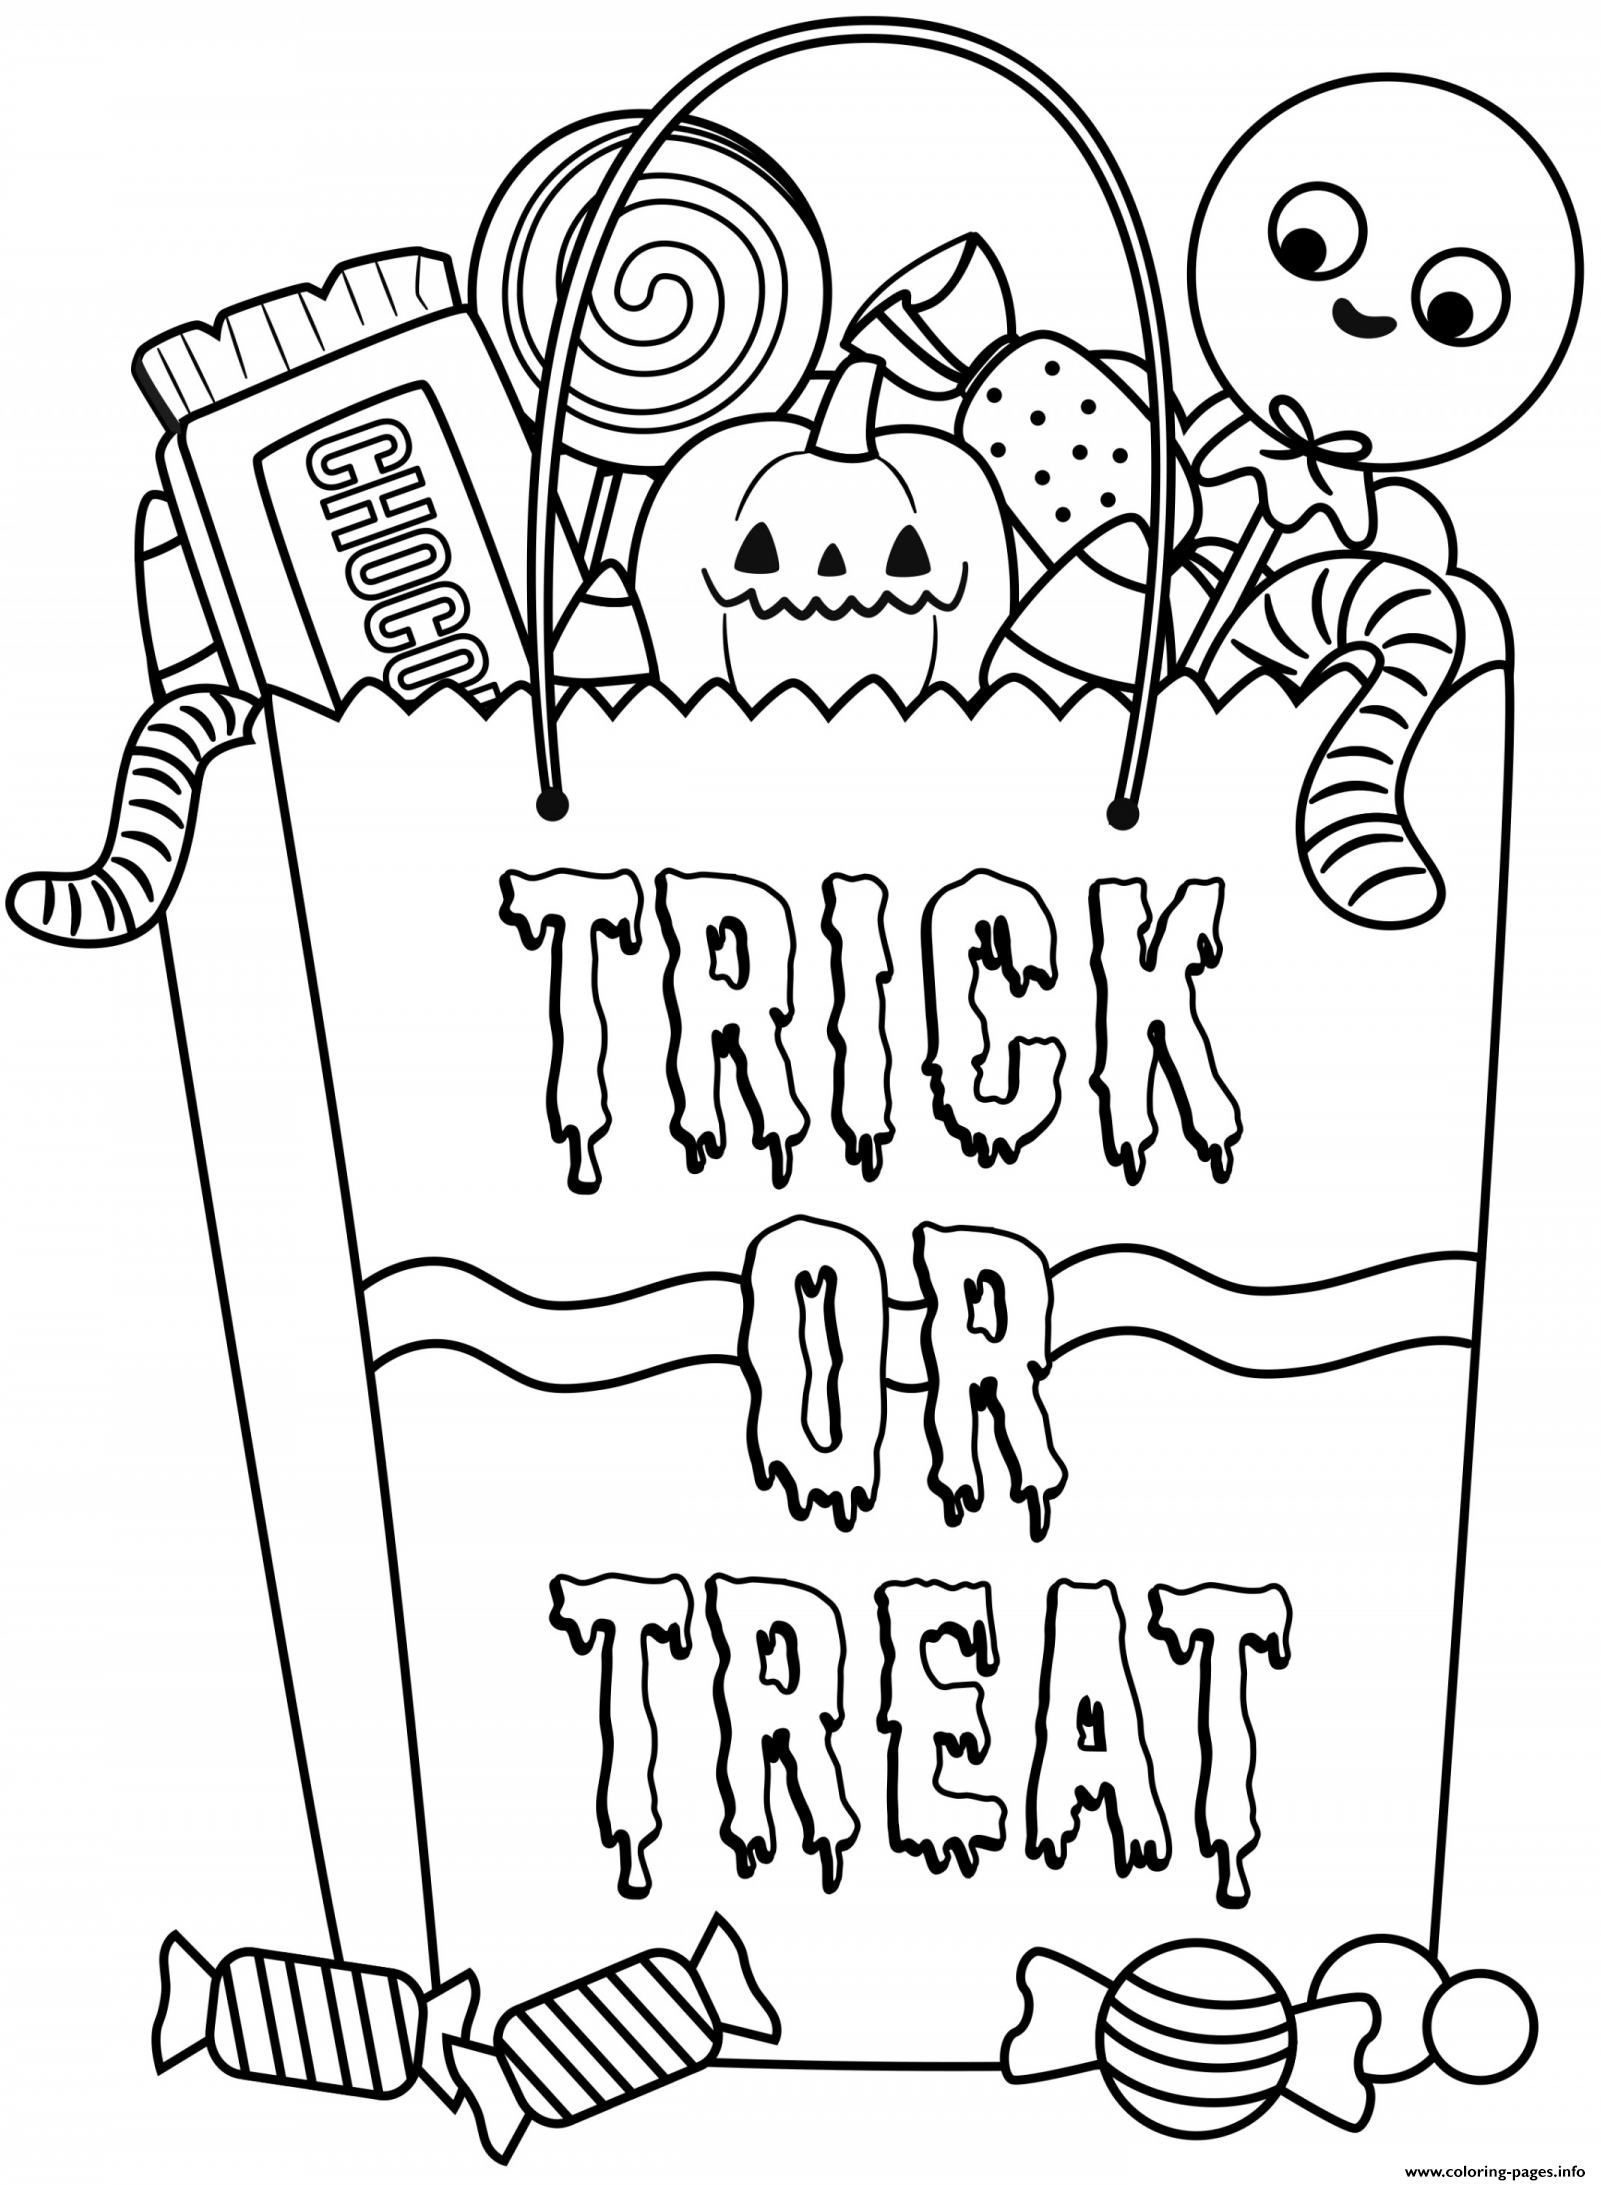 Halloween candy bag wh treats coloring page printable